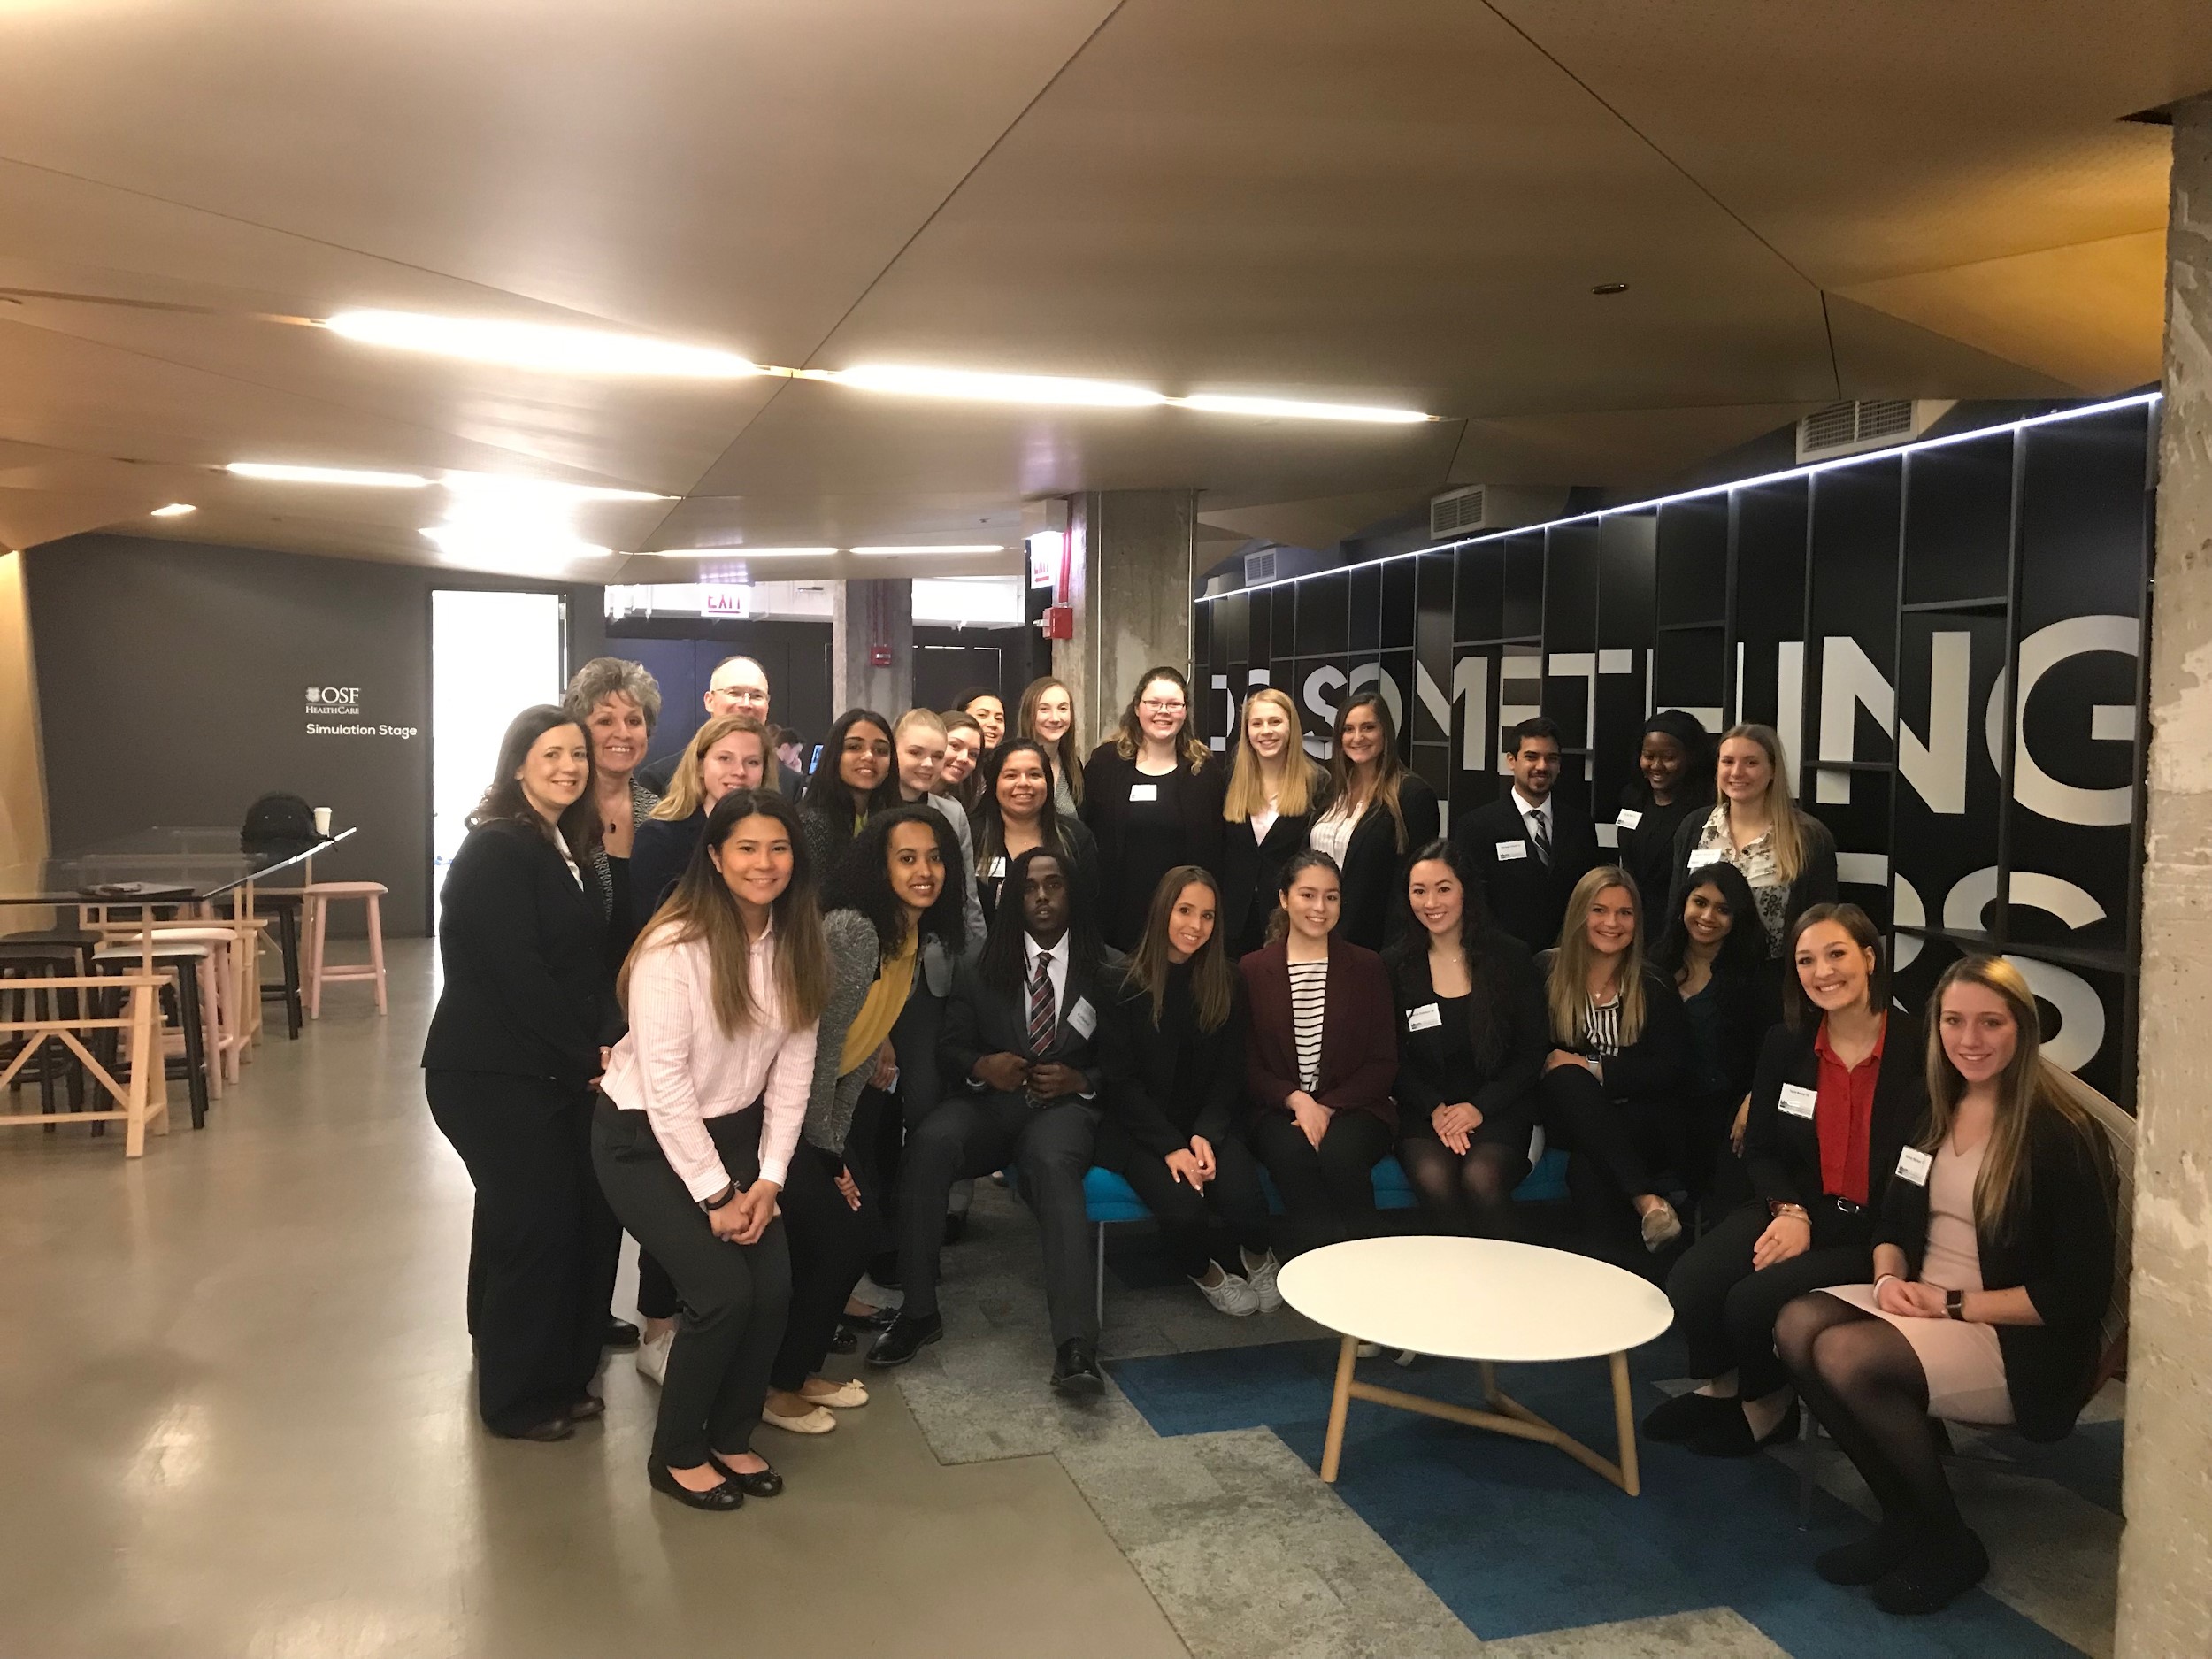 2019 CIE participants visited Matter, a healthcare startup incubator